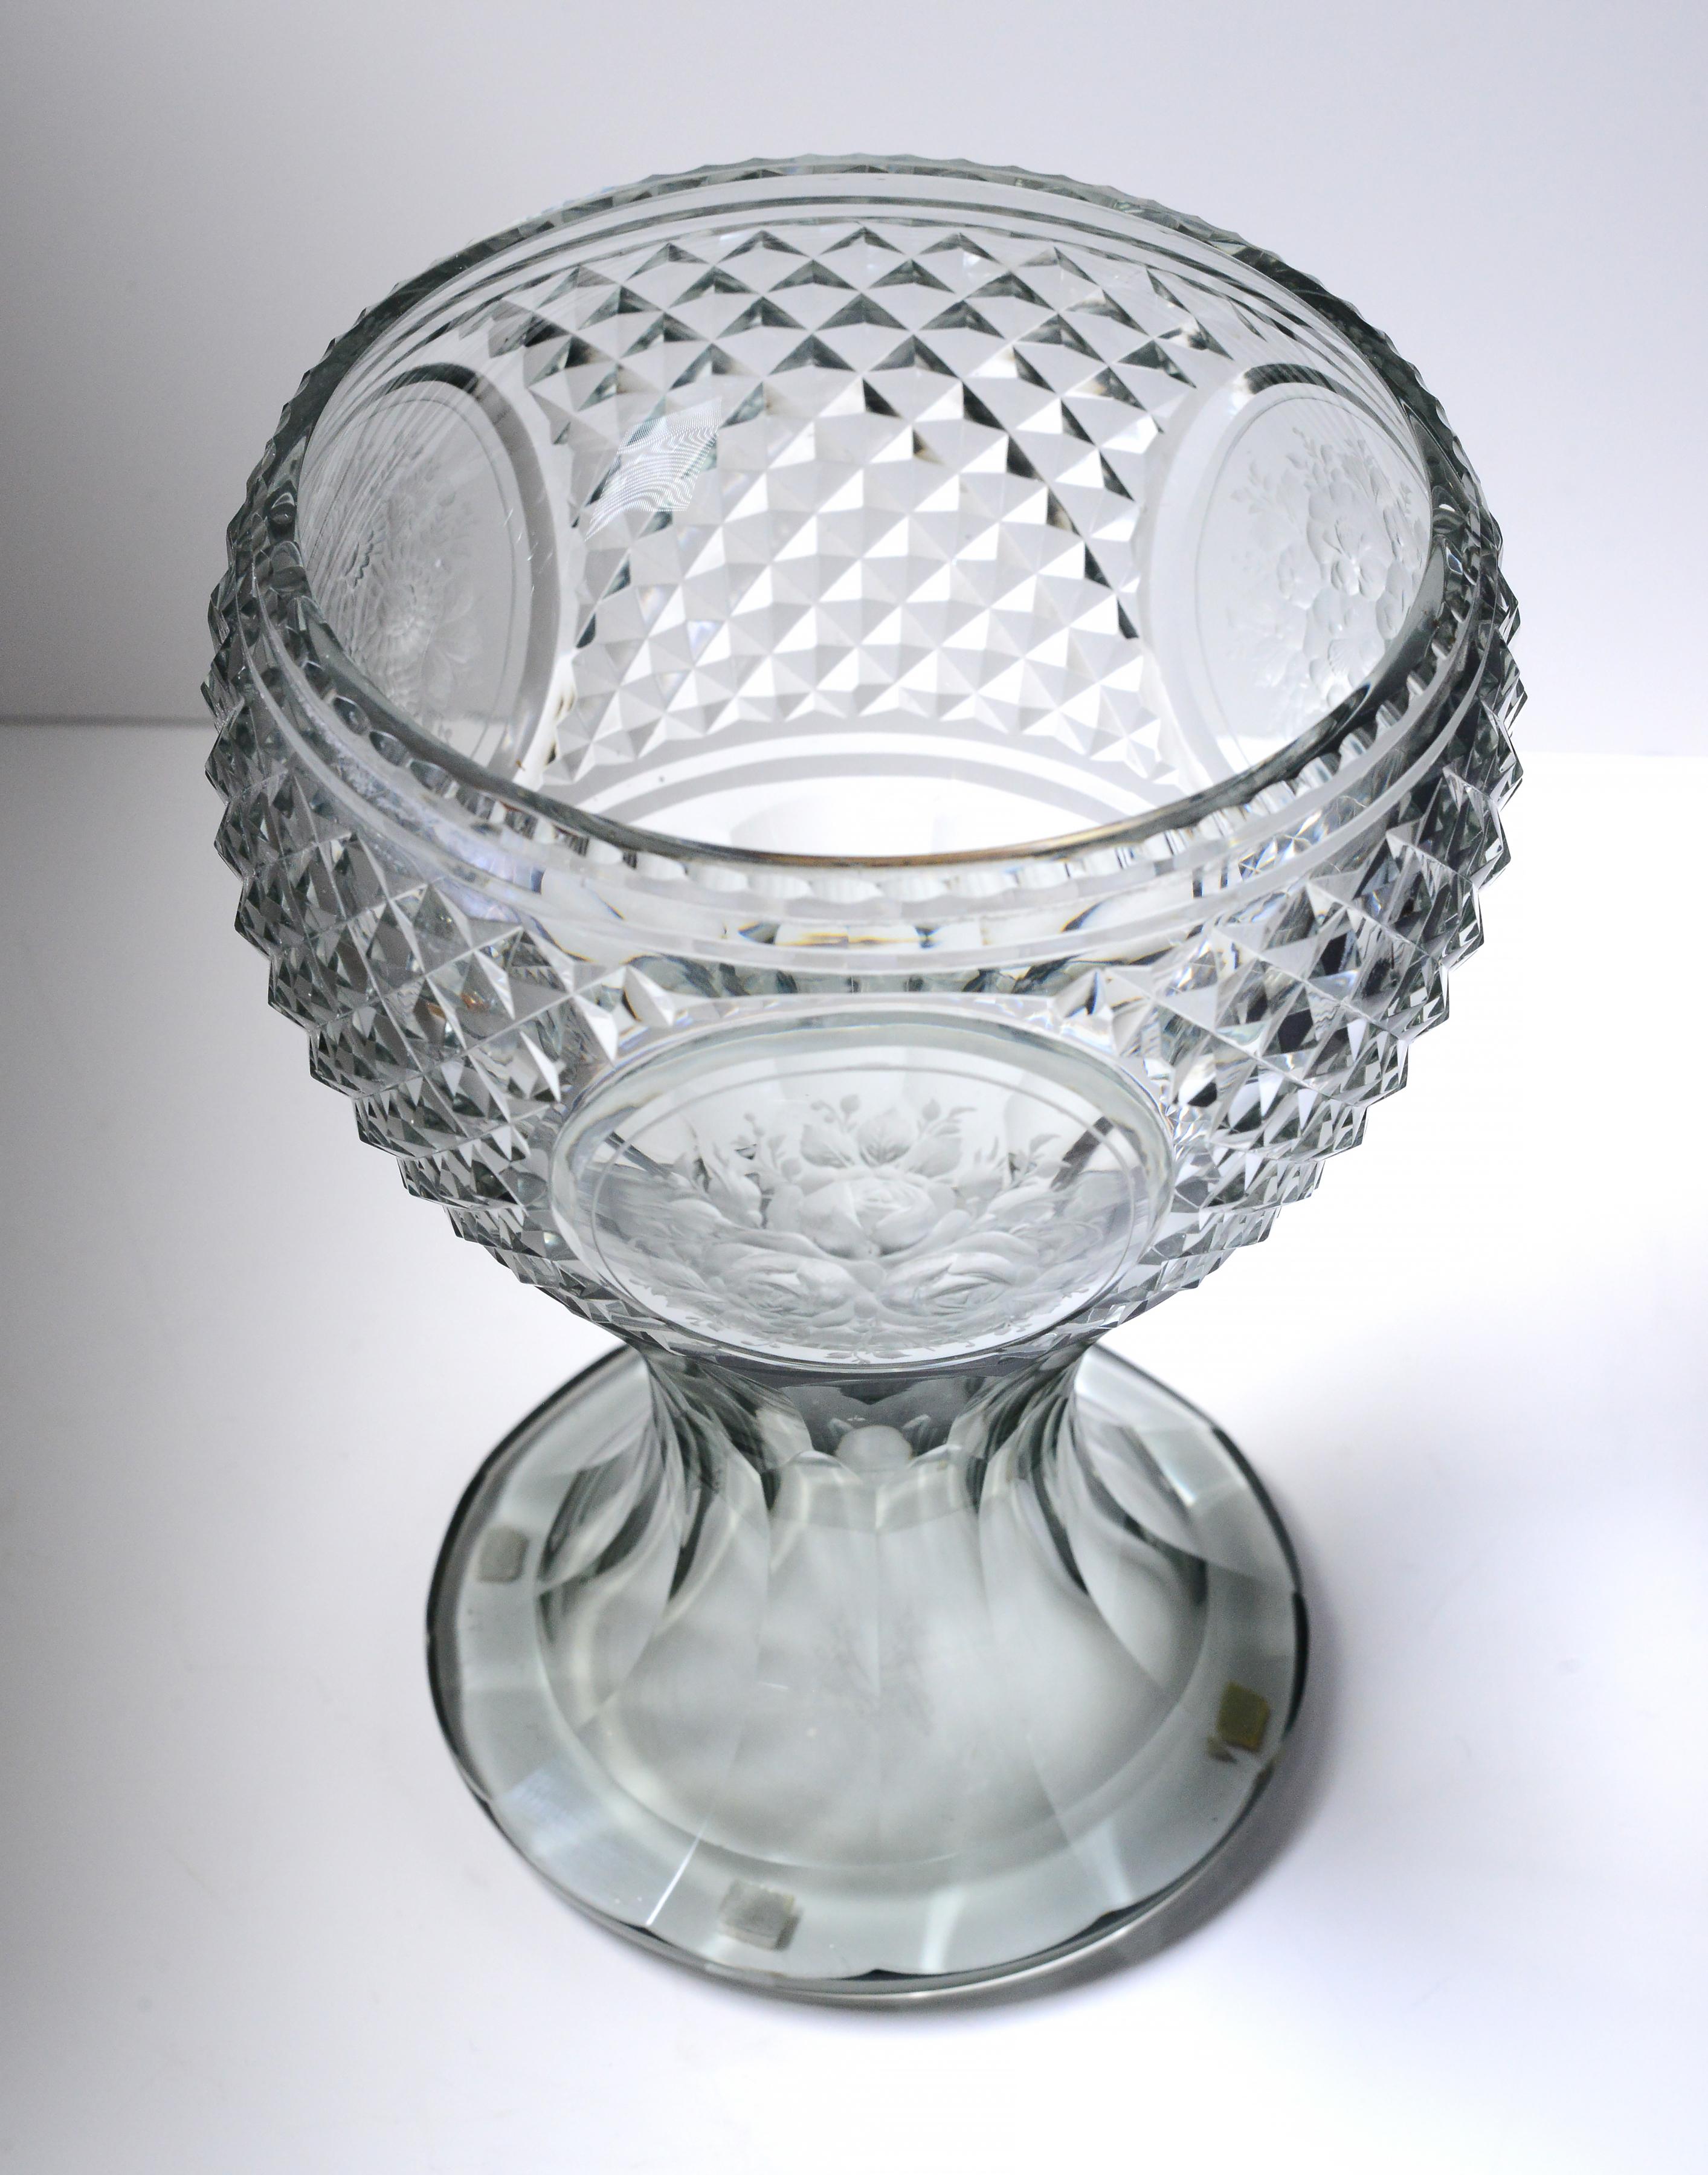 Antique Russian Carved Crystal Glass Vase with Floral Engraved 19th century For Sale 2